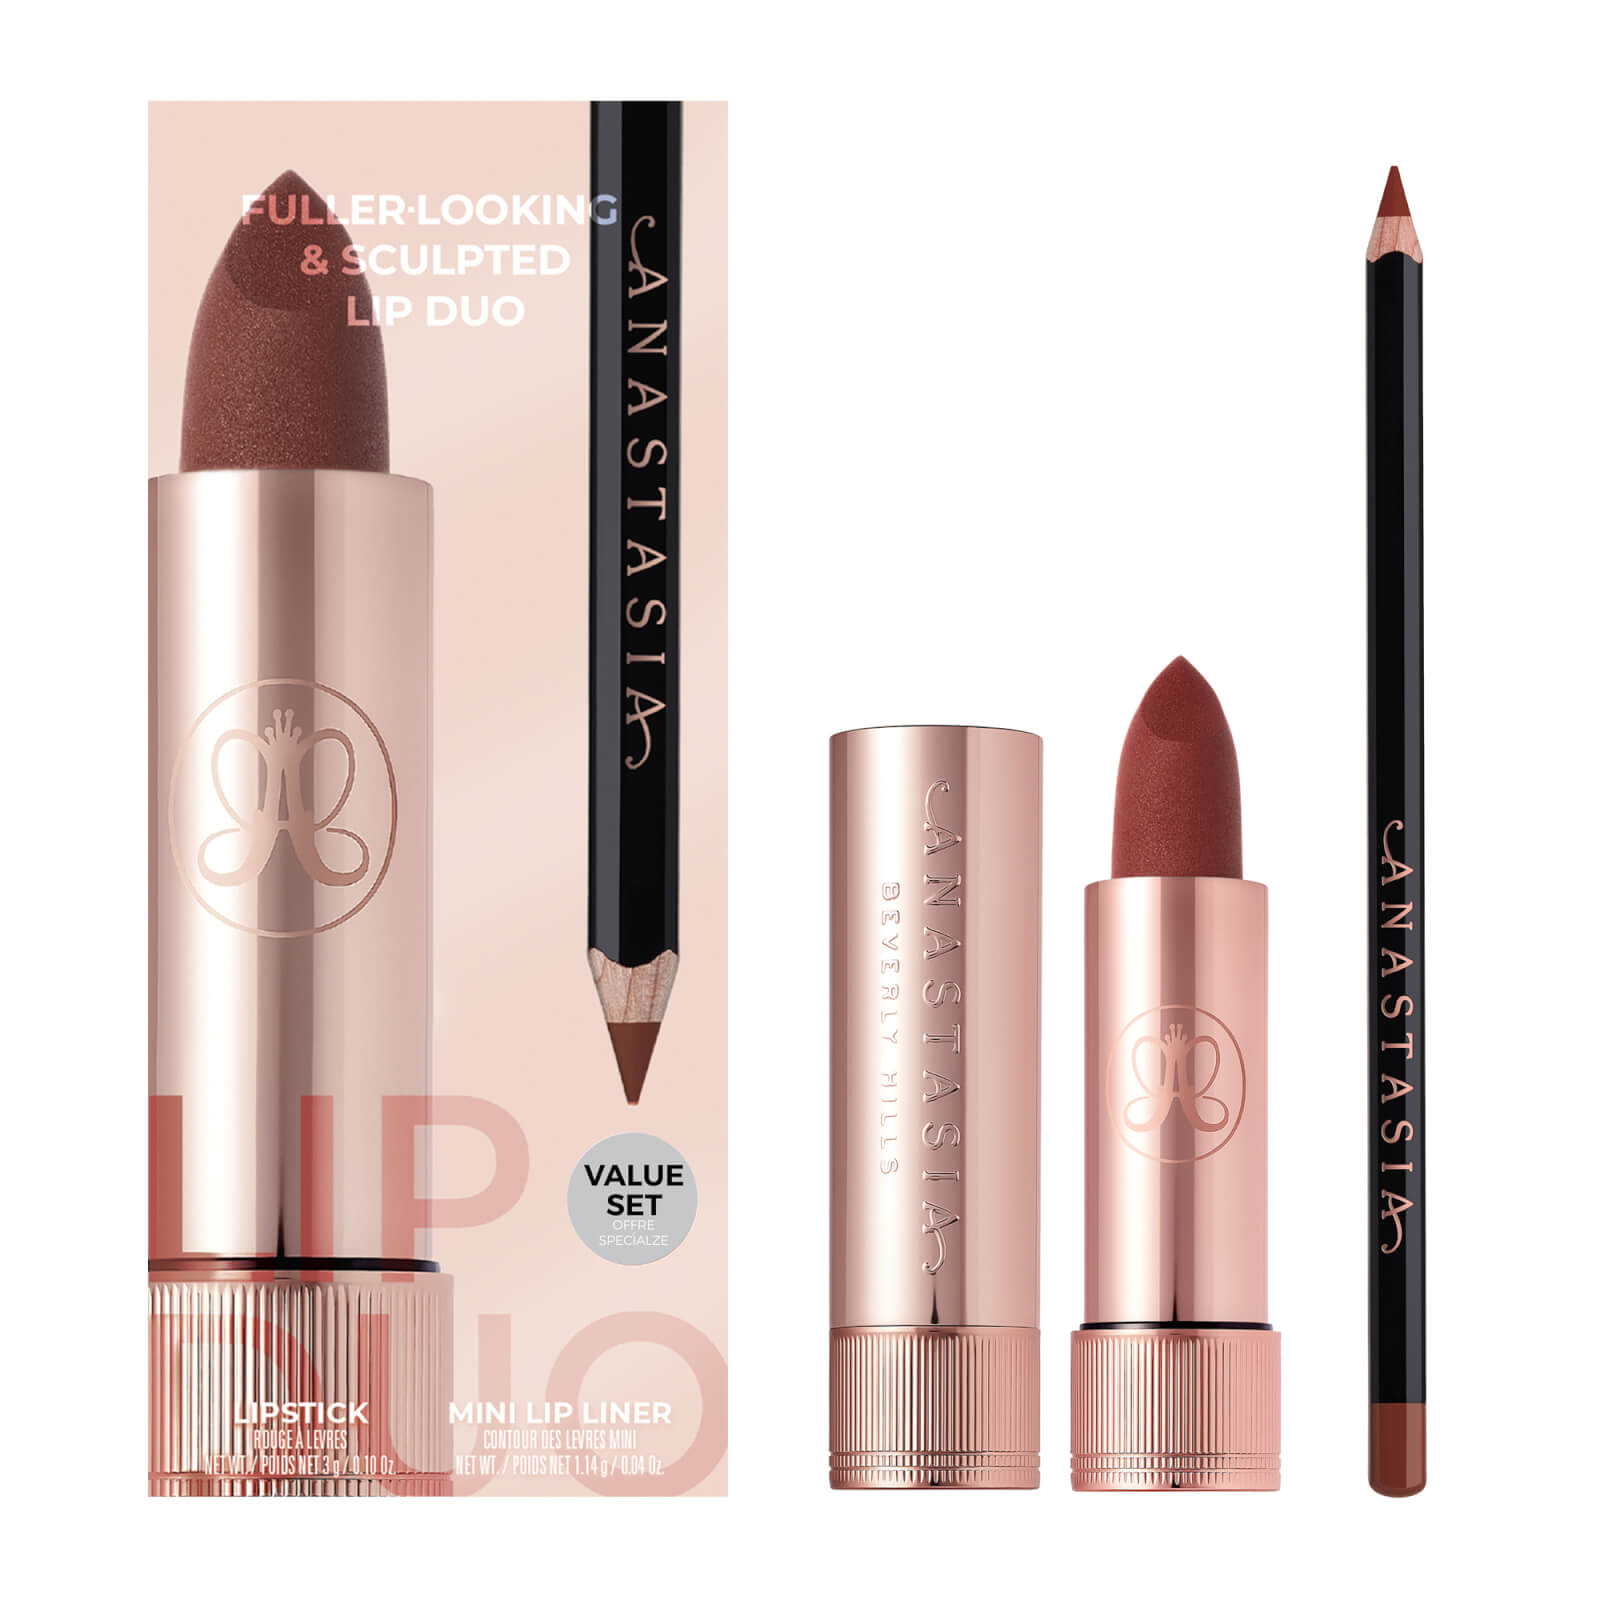 Image of Anastasia Beverly Hills Fuller Looking and Sculpted Lip Duo Kit (Various Shades) - Toffee Matte Lipstick & Malt Lip Liner